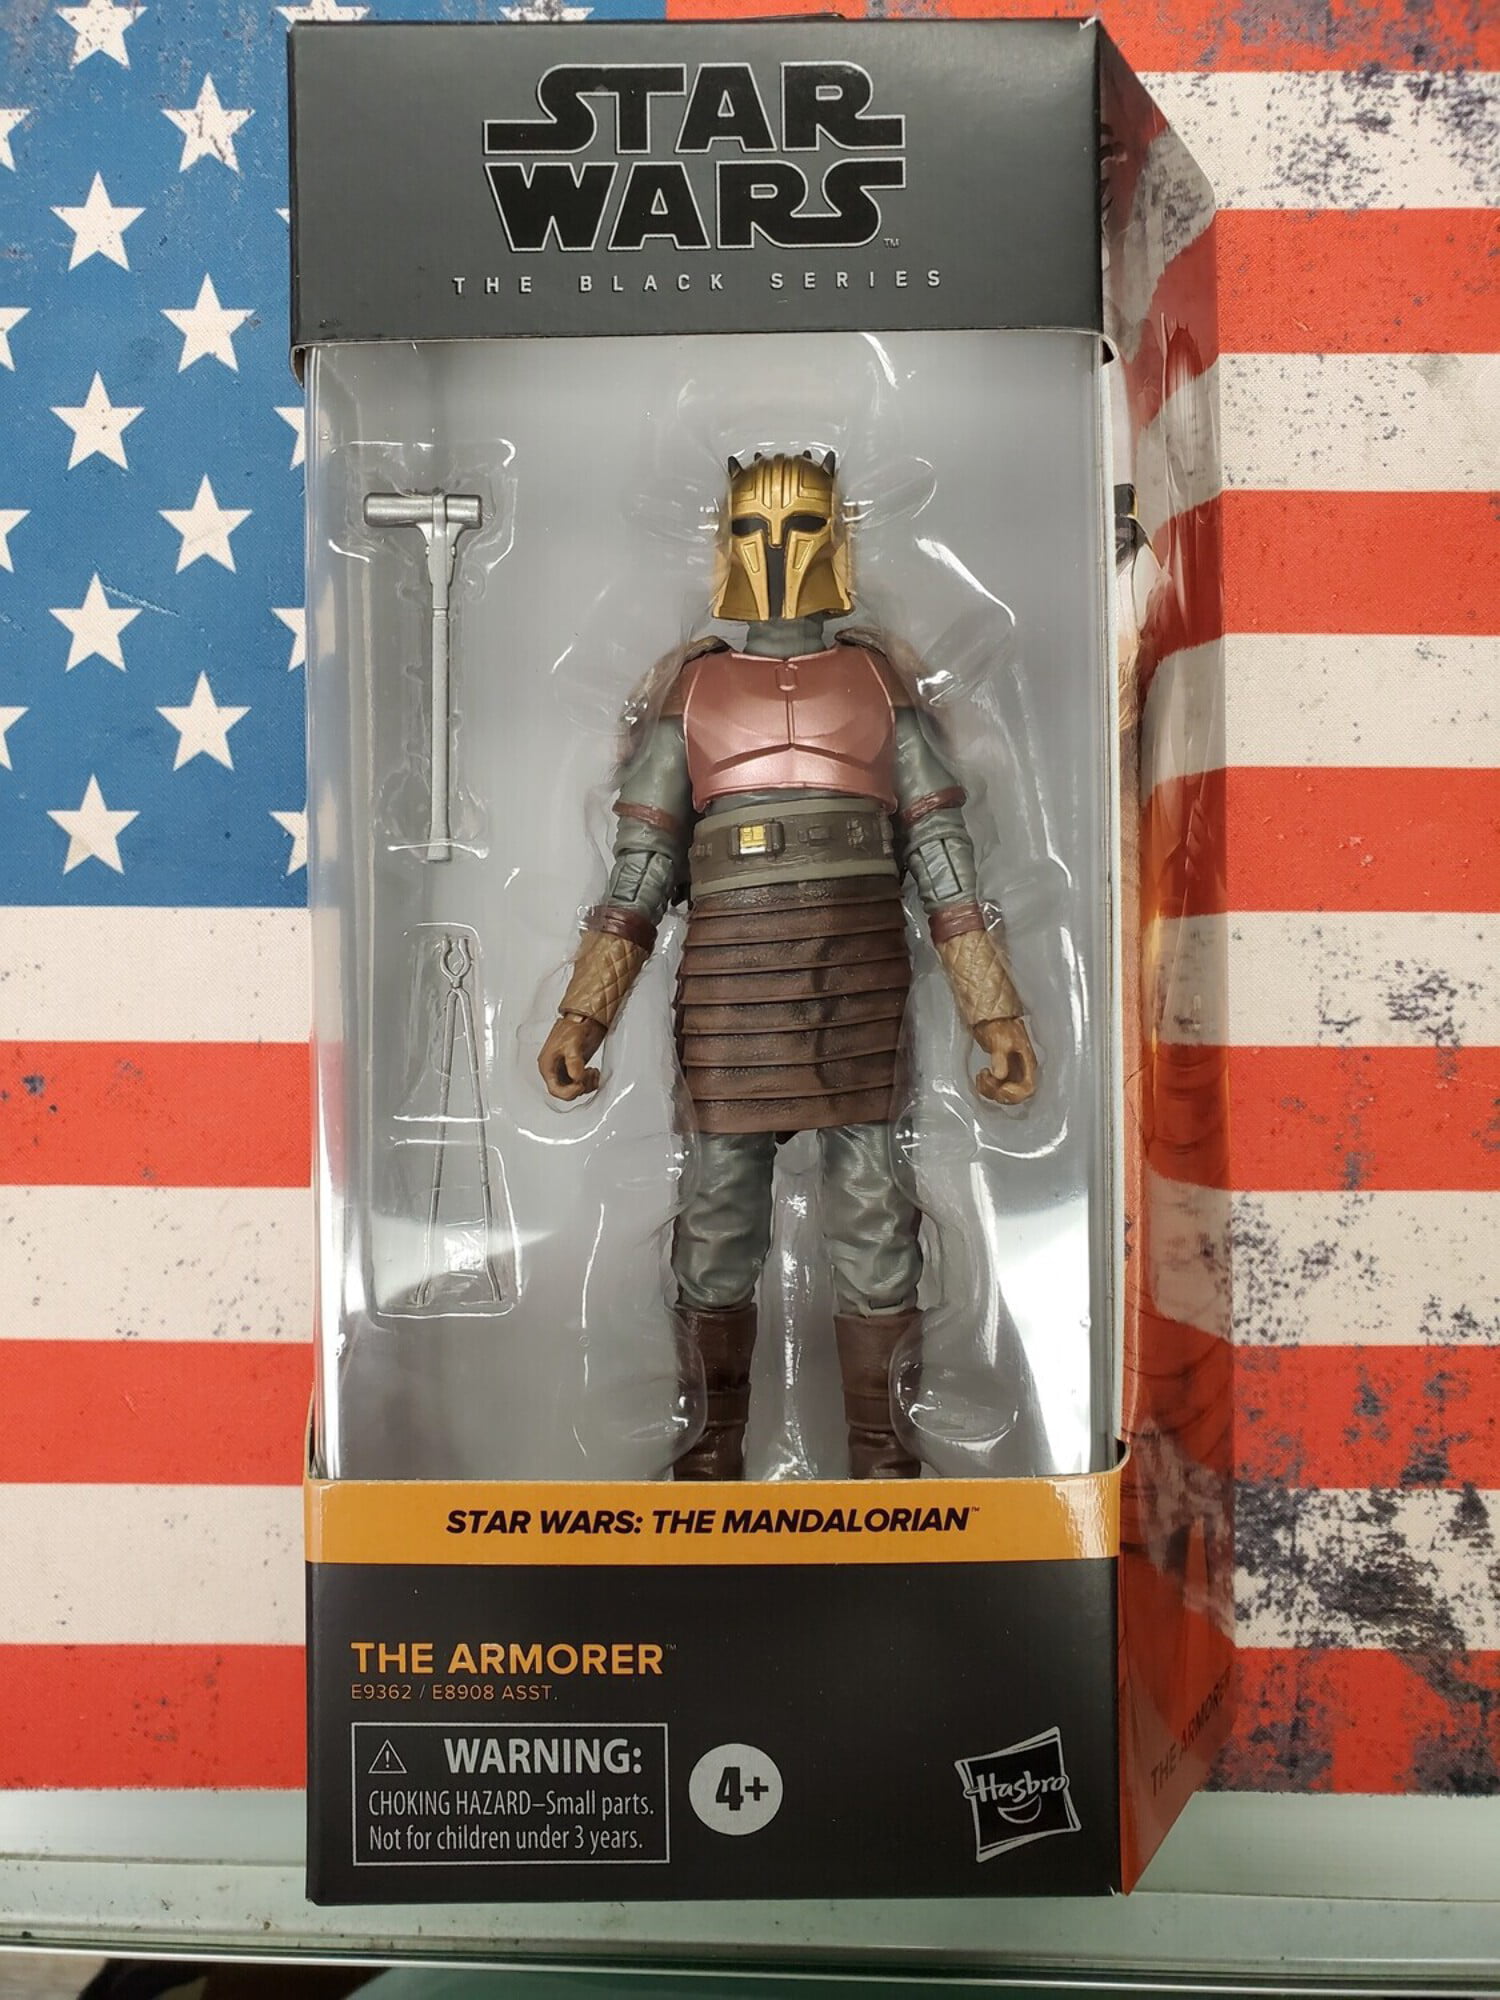 Star Wars The Black Series The Armorer The Mandalorian Action Figure 